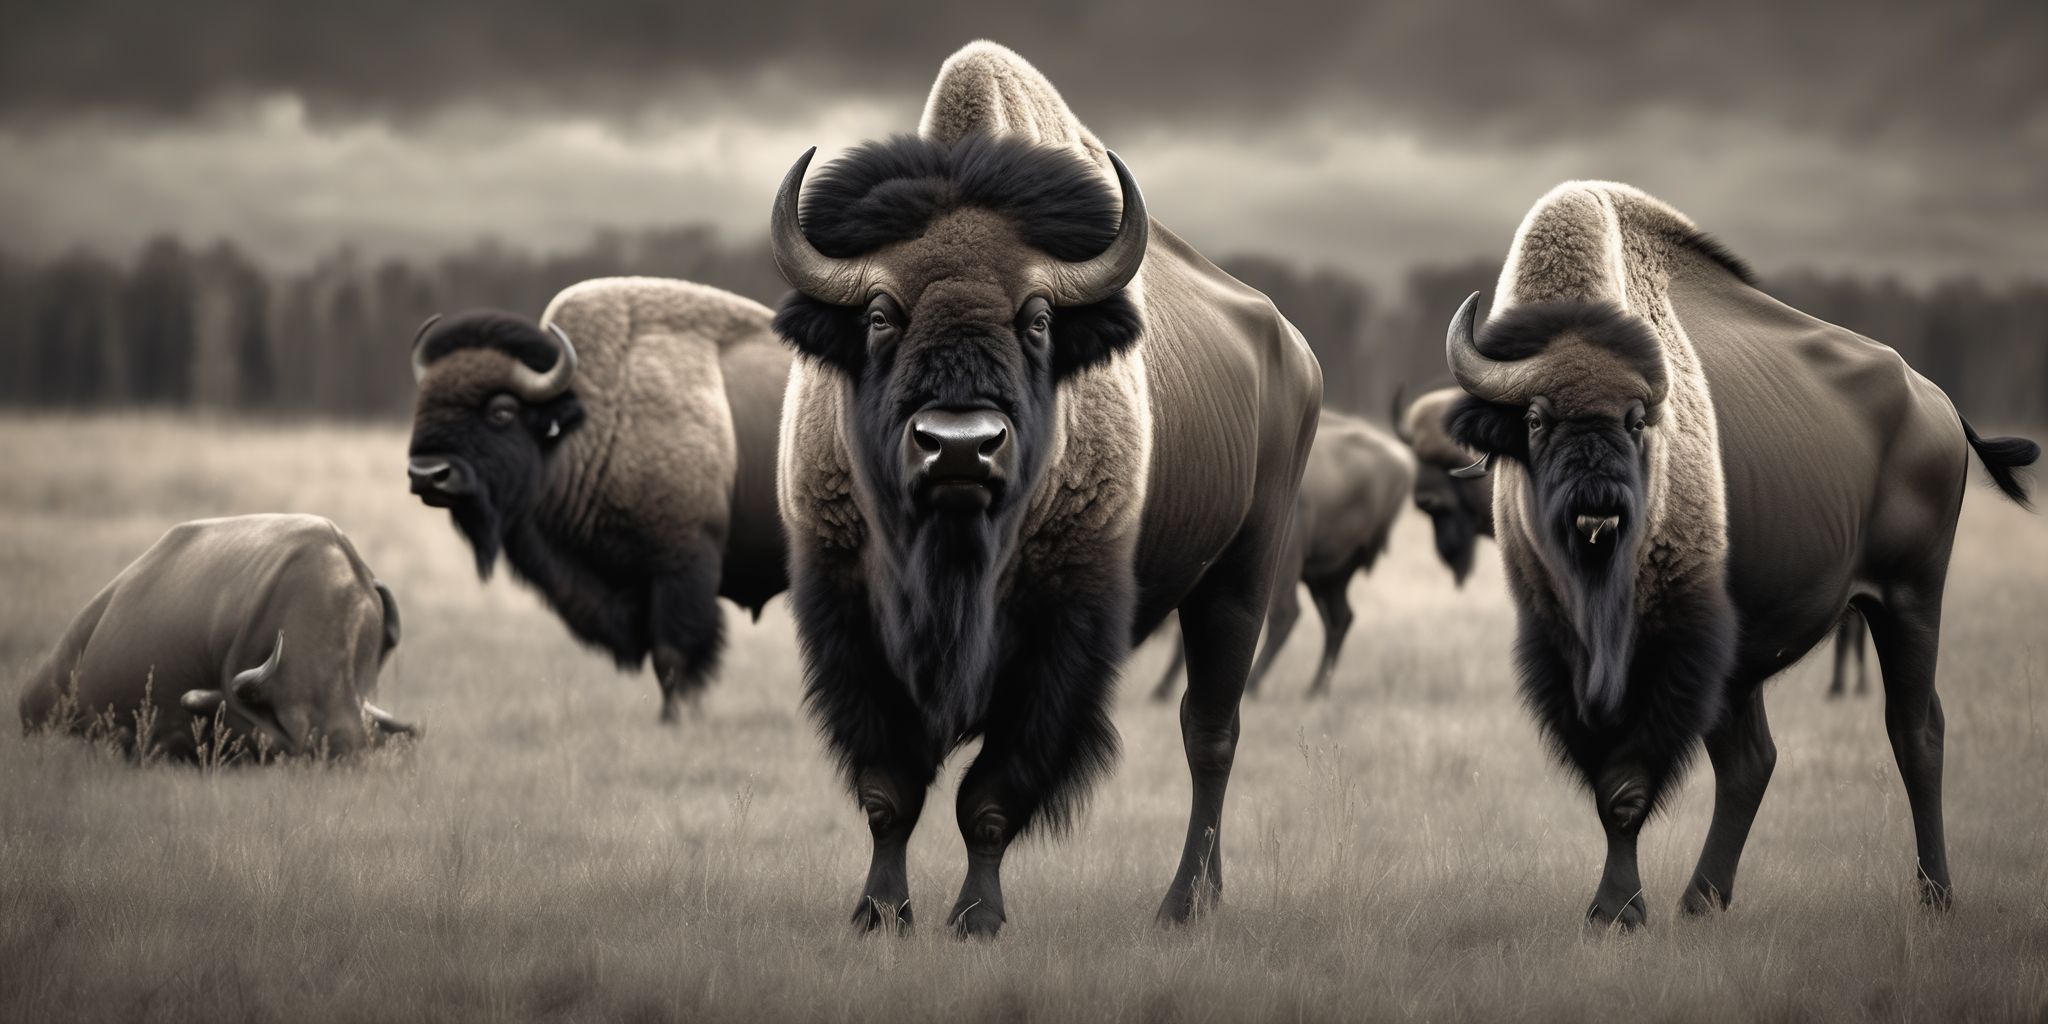 Buffalo  in realistic, photographic style